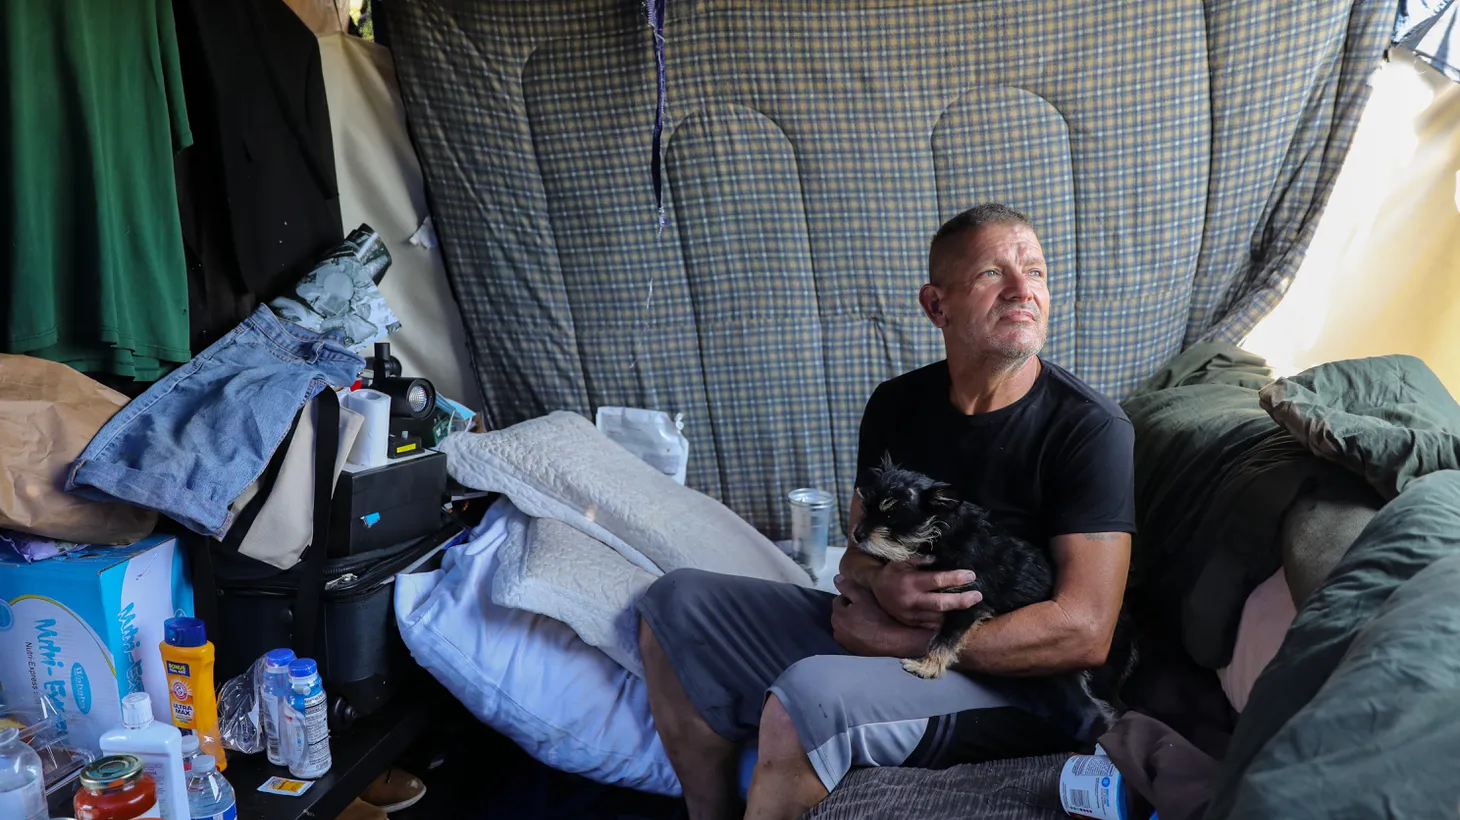 Army veteran Scott Marek settled in at the Veterans Row encampment after the VA turned him away because he wouldn’t part with his dog, Keisha.